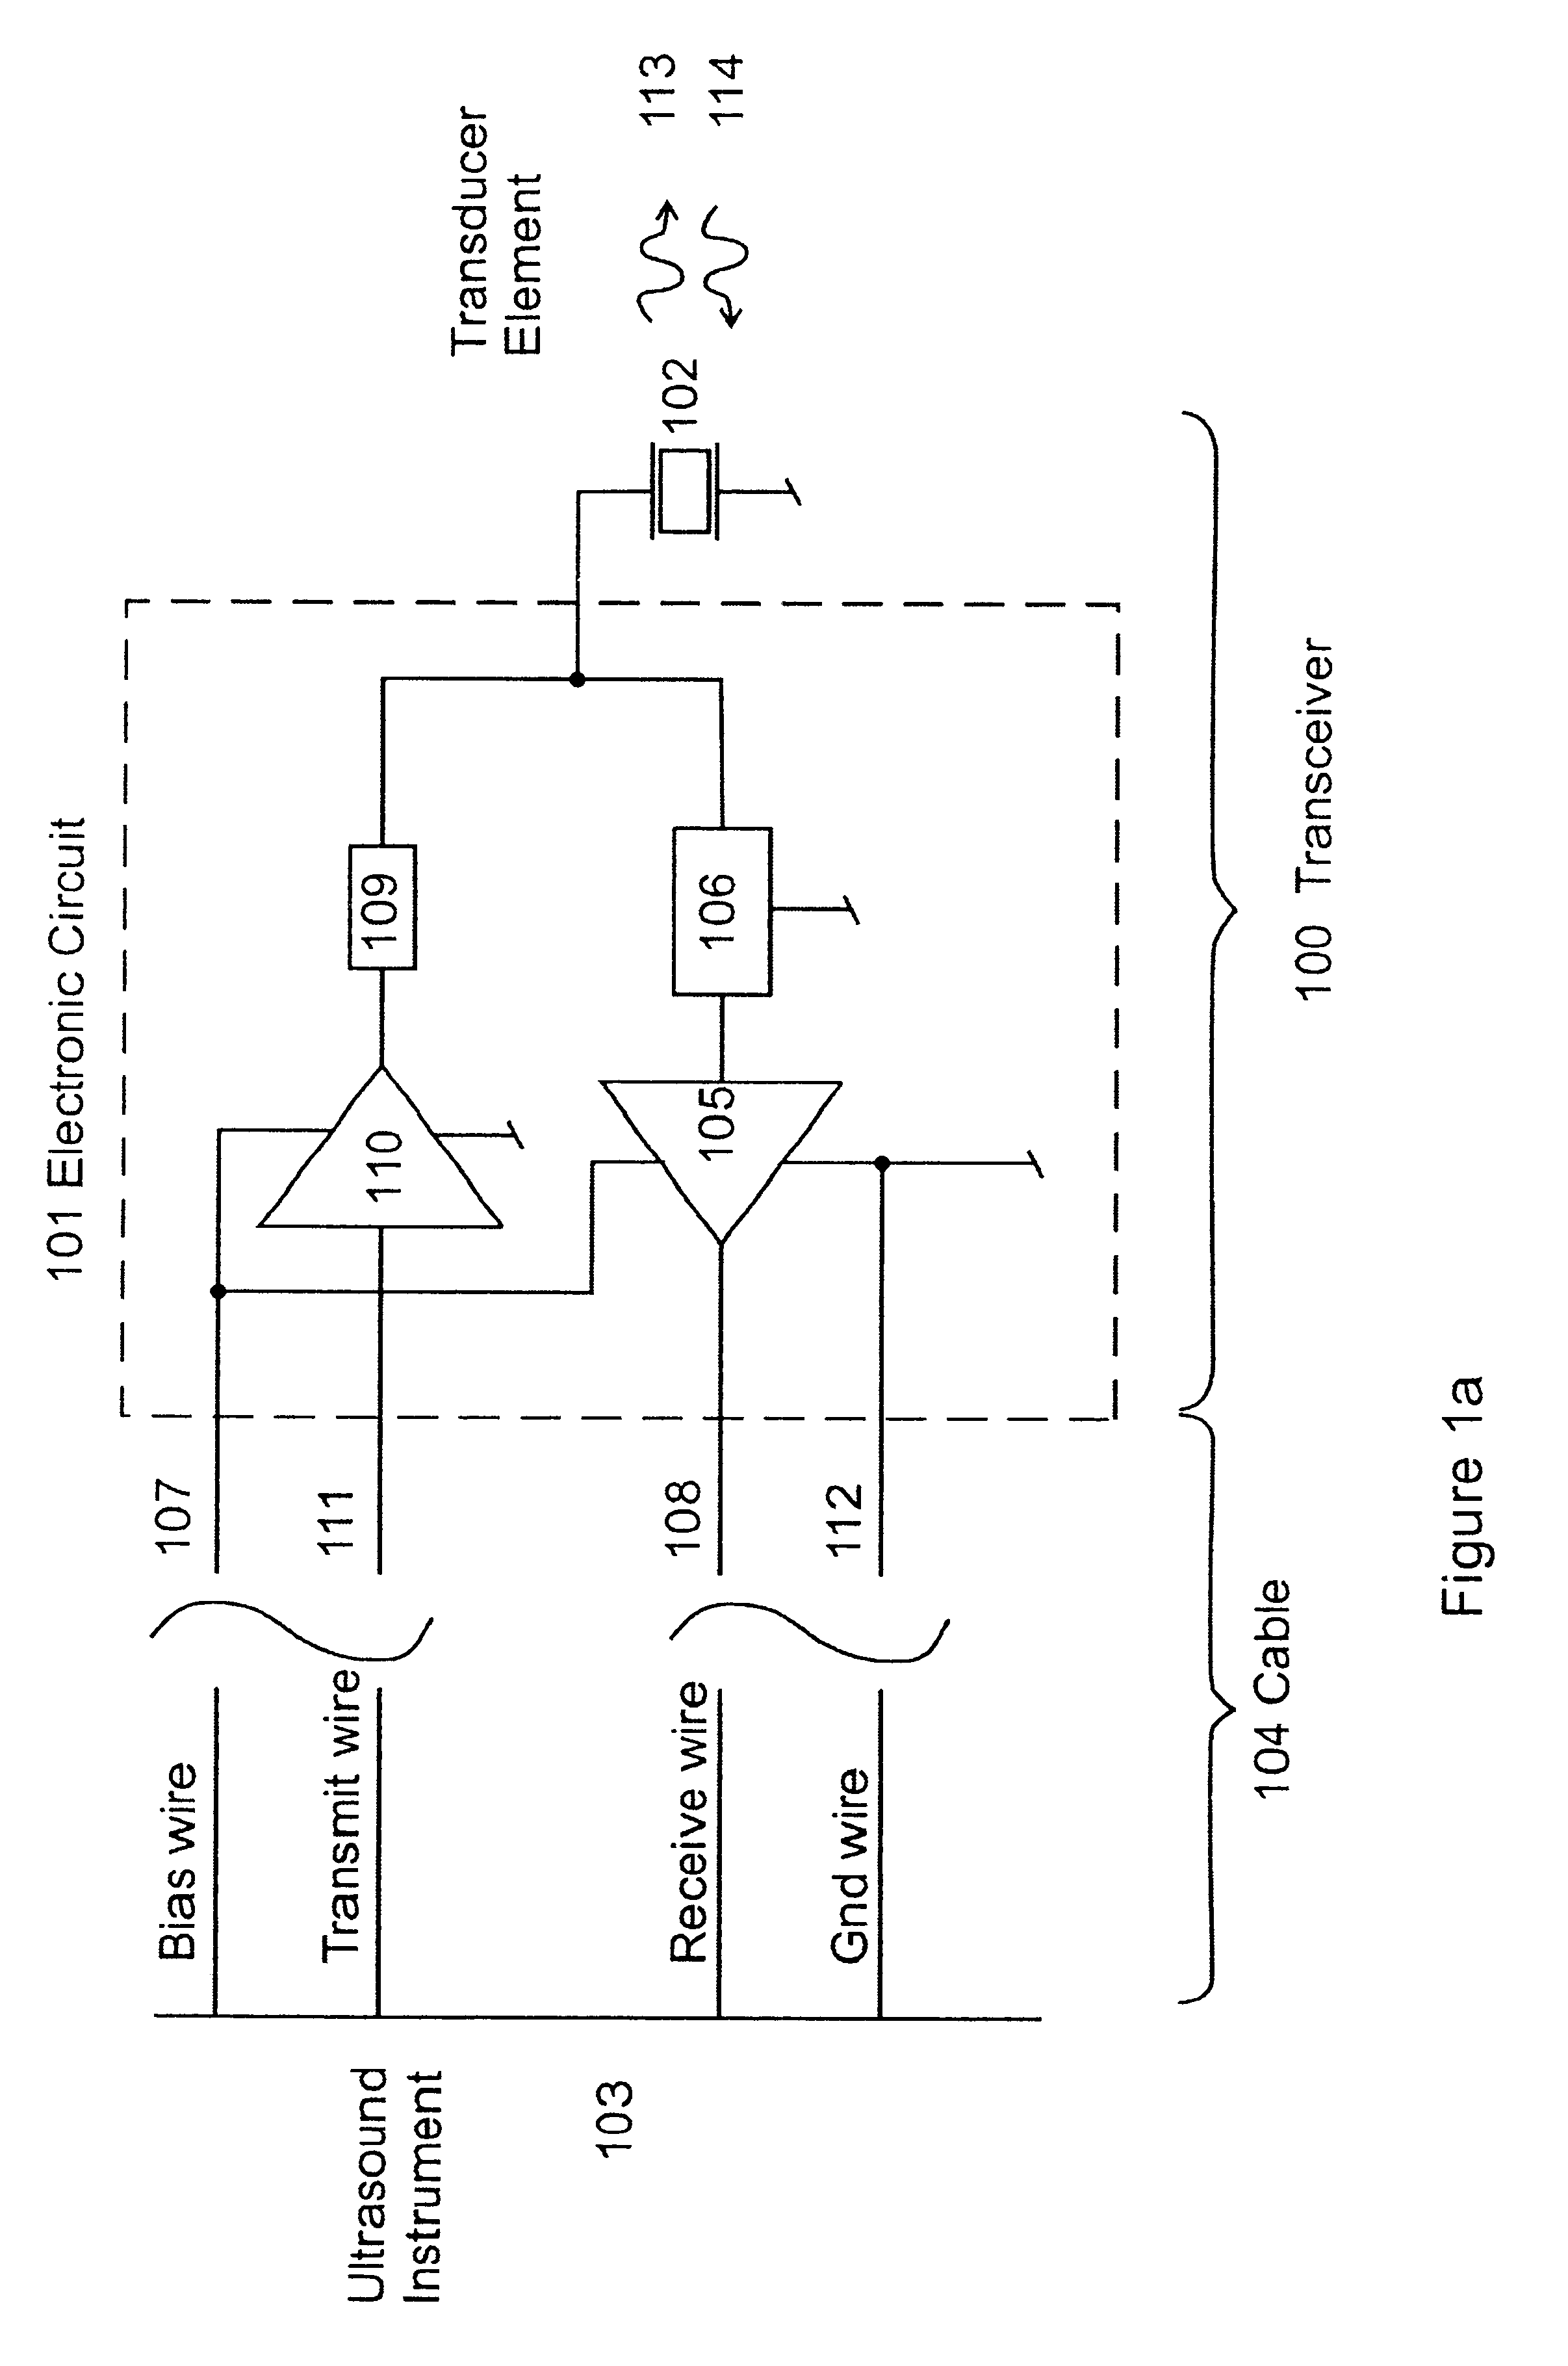 Ultrasound transceiver system for remote operation through a minimal number of connecting wires